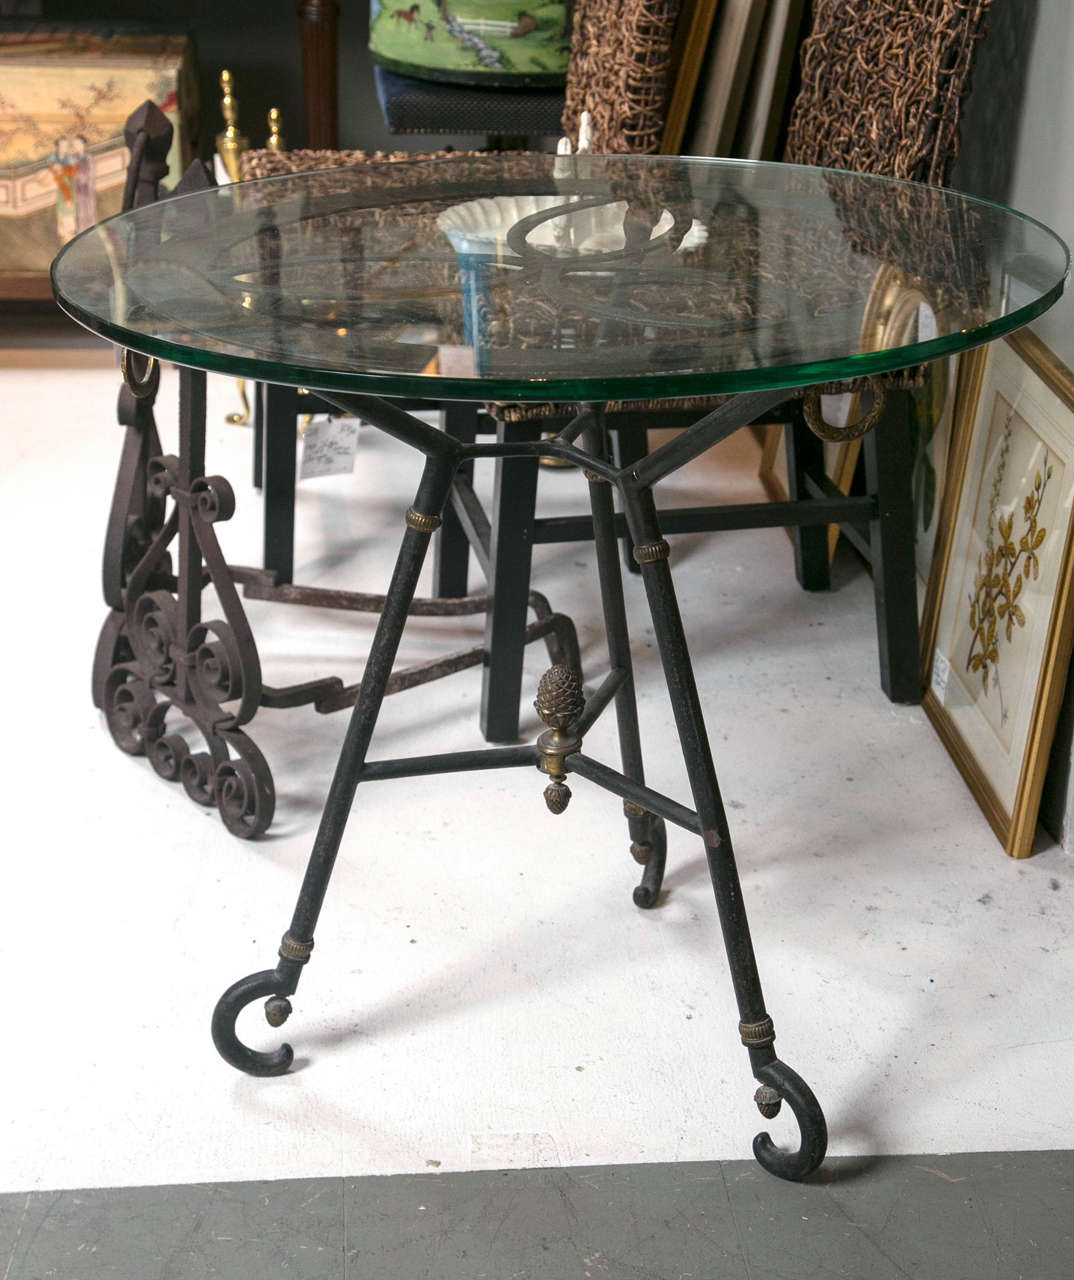 A great glass top iron table, circa 1950s.